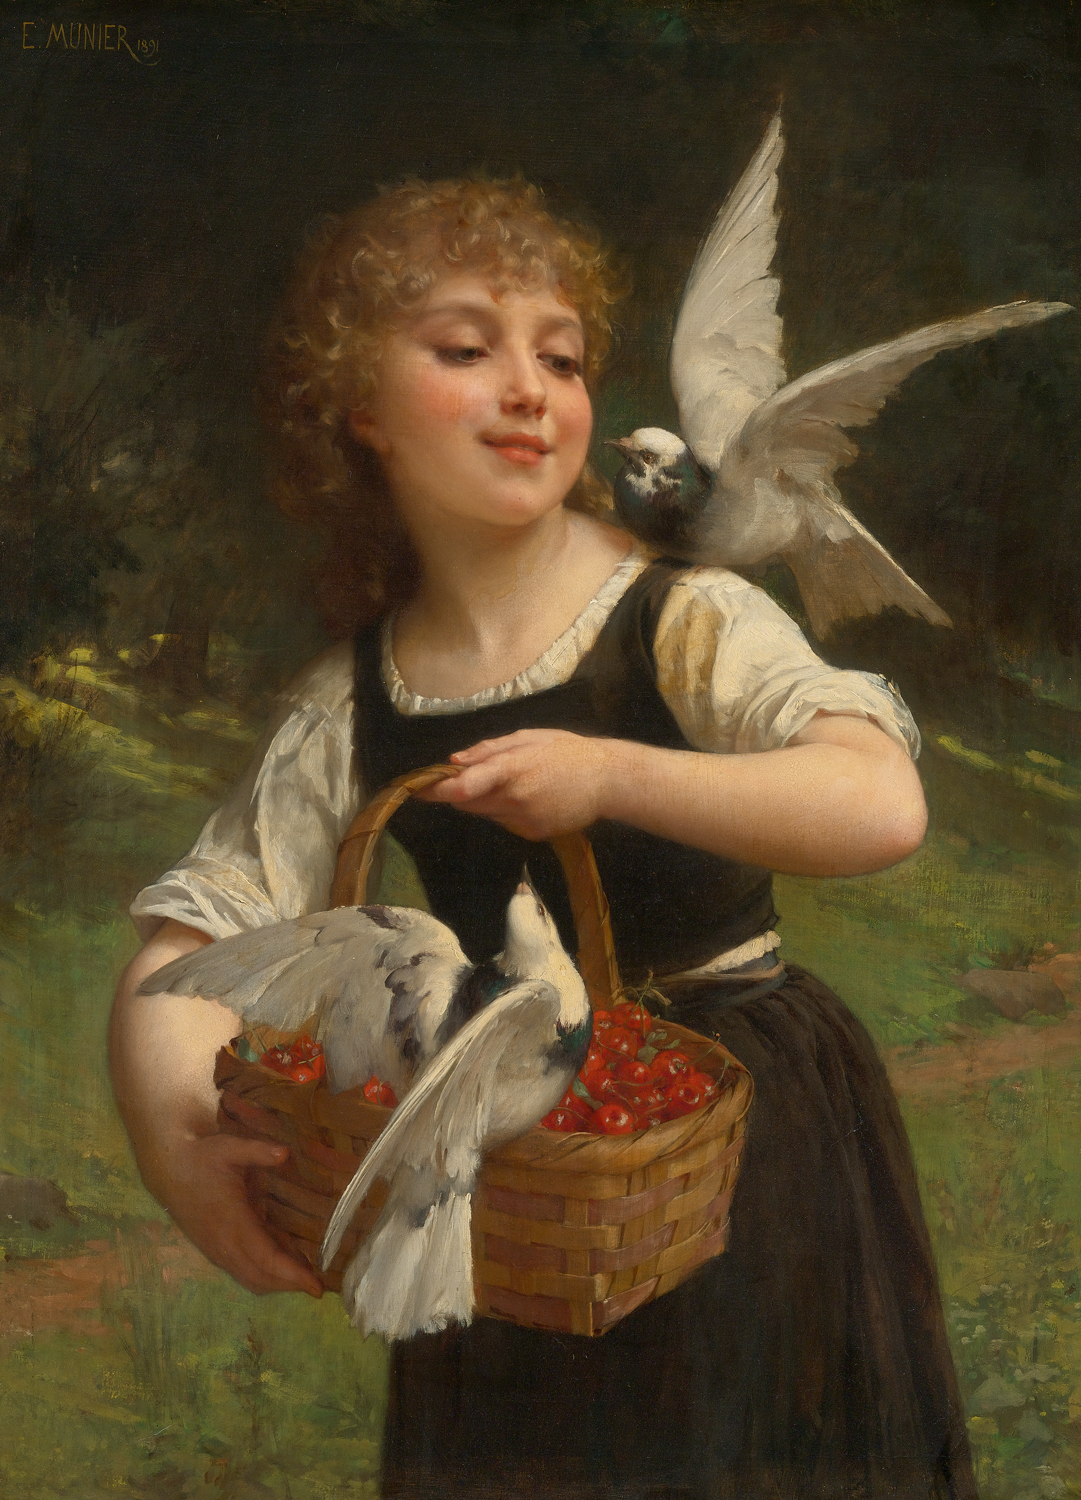 A young girl with a basket of berries and birds - Coo! Young Doves. Coo! - Emile Munier